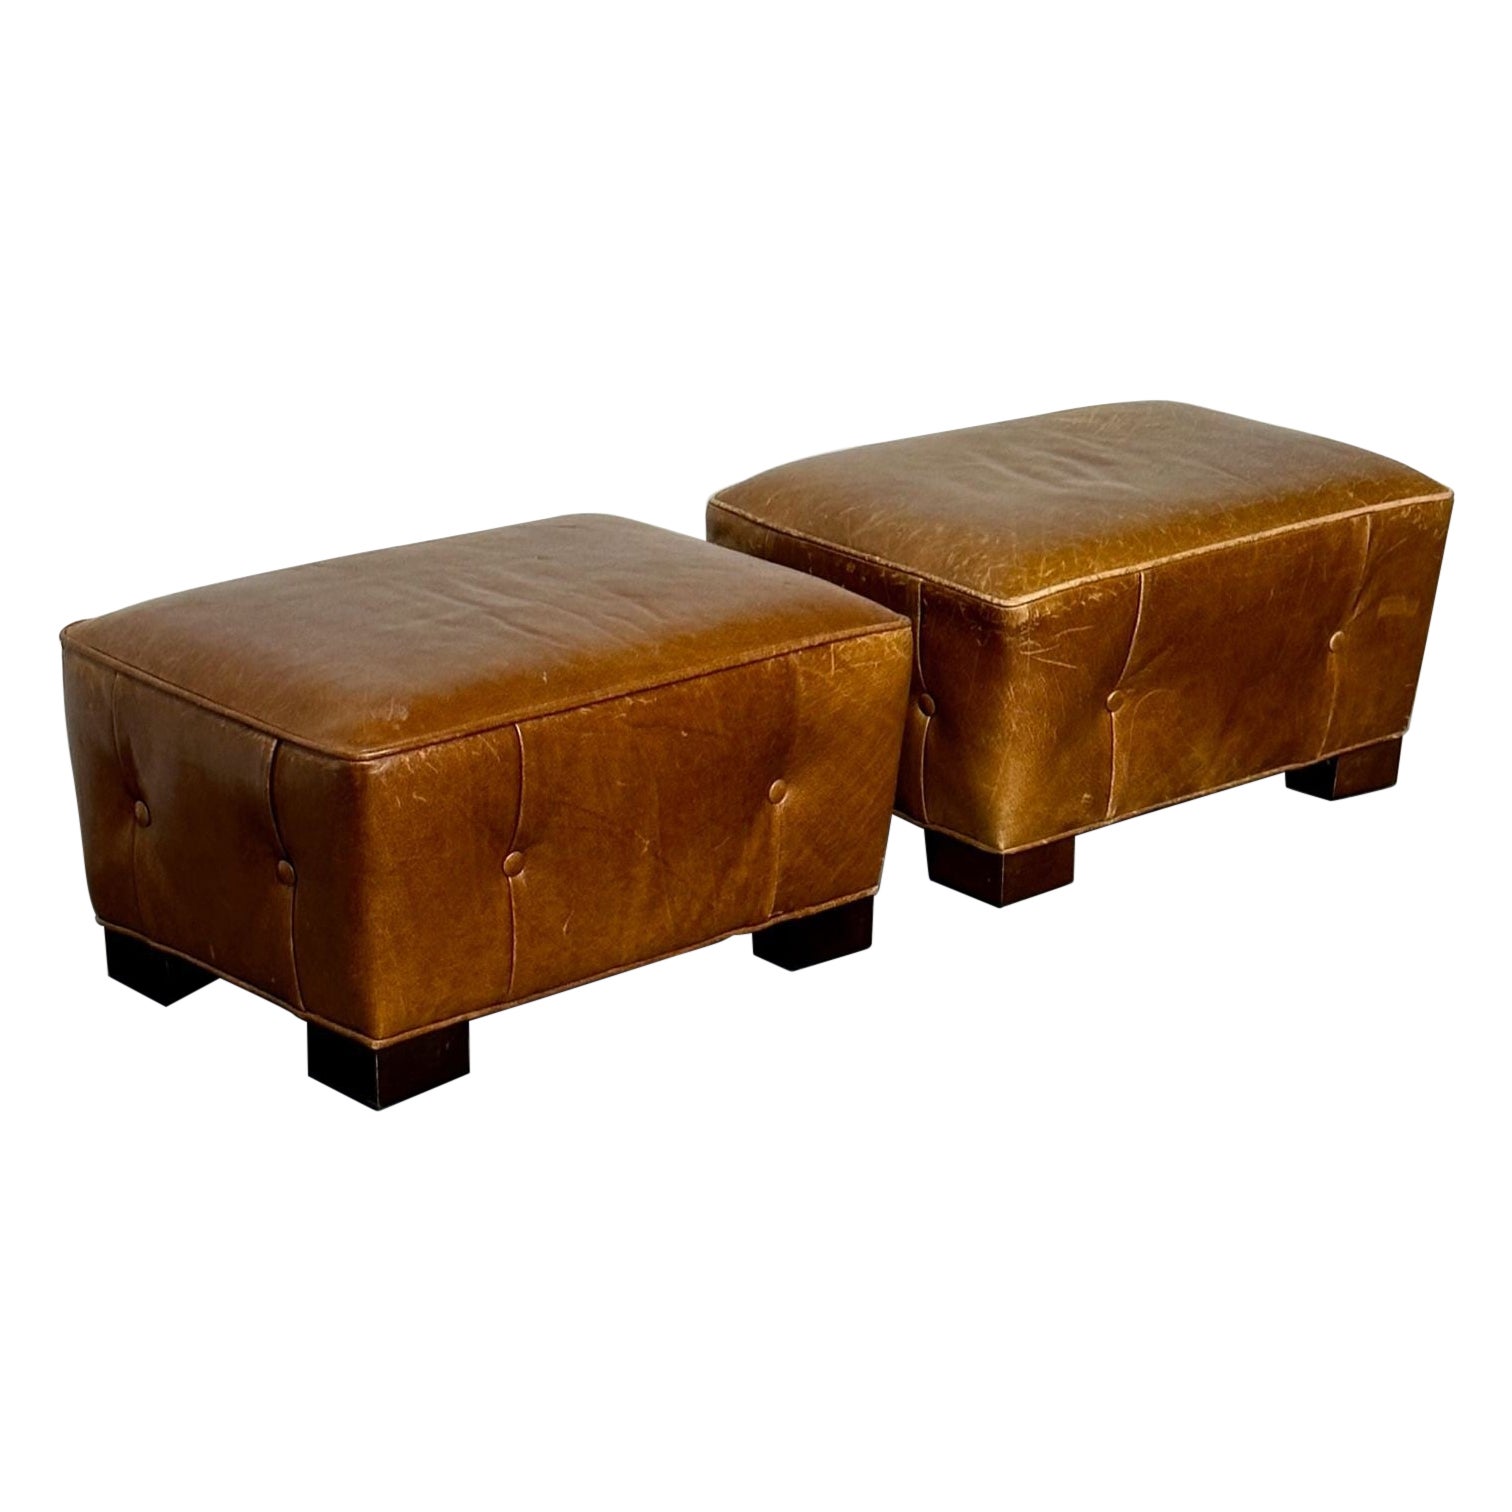 French Designer, Art Deco, Ottomans, Footstools, Distressed Leather, 1930s